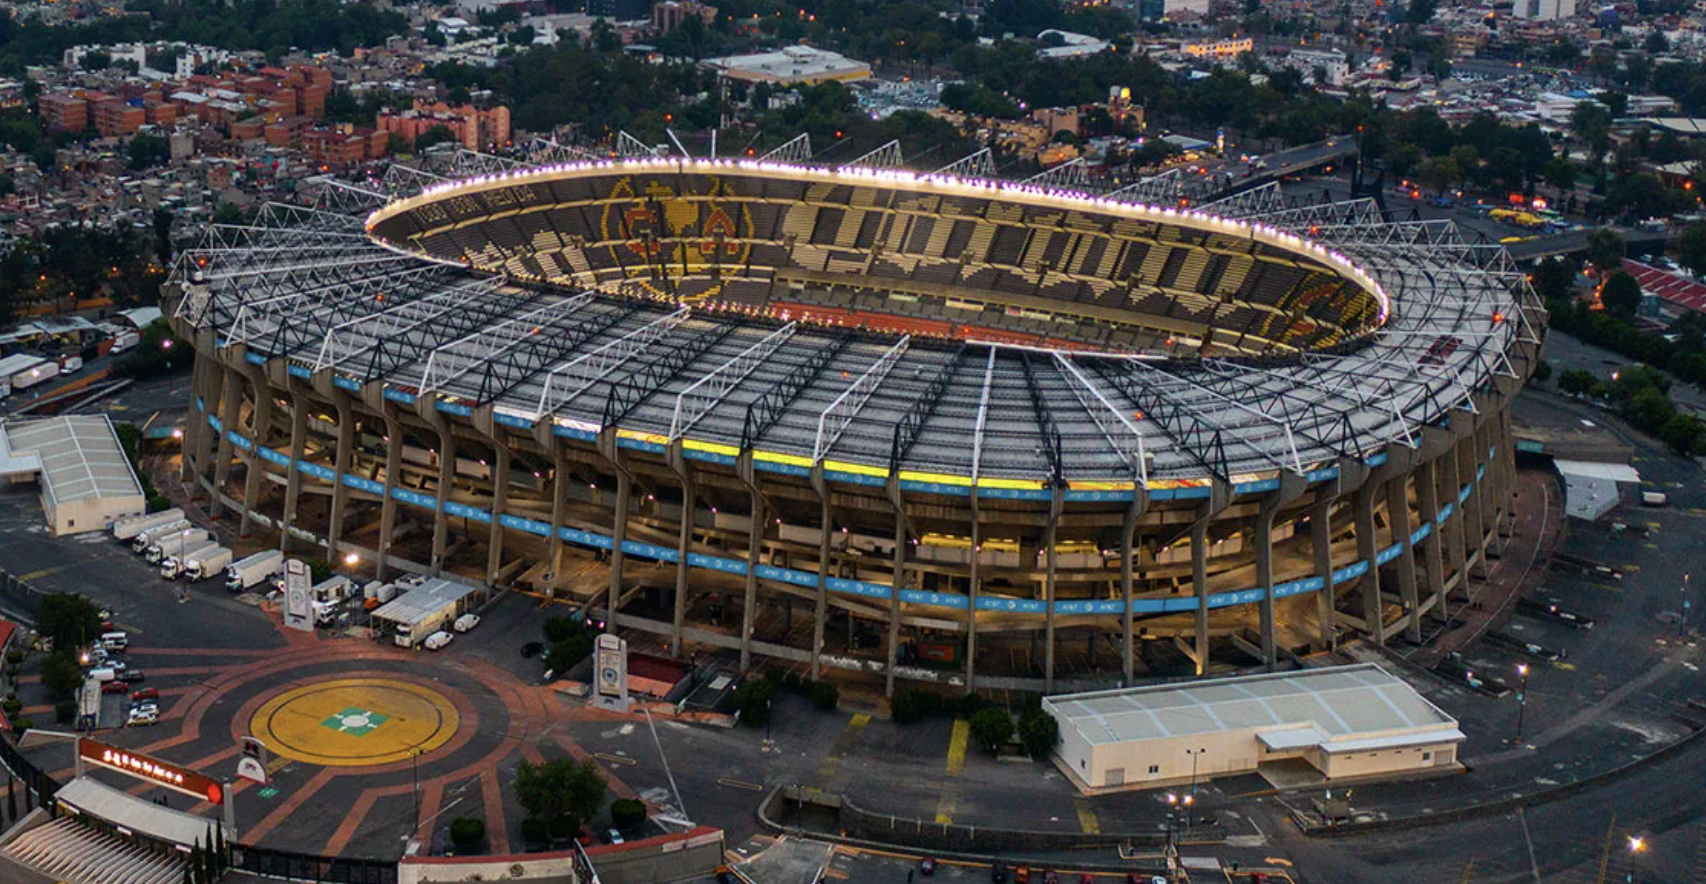 América would avoid playing for Azul when it moves from the Azteca Stadium